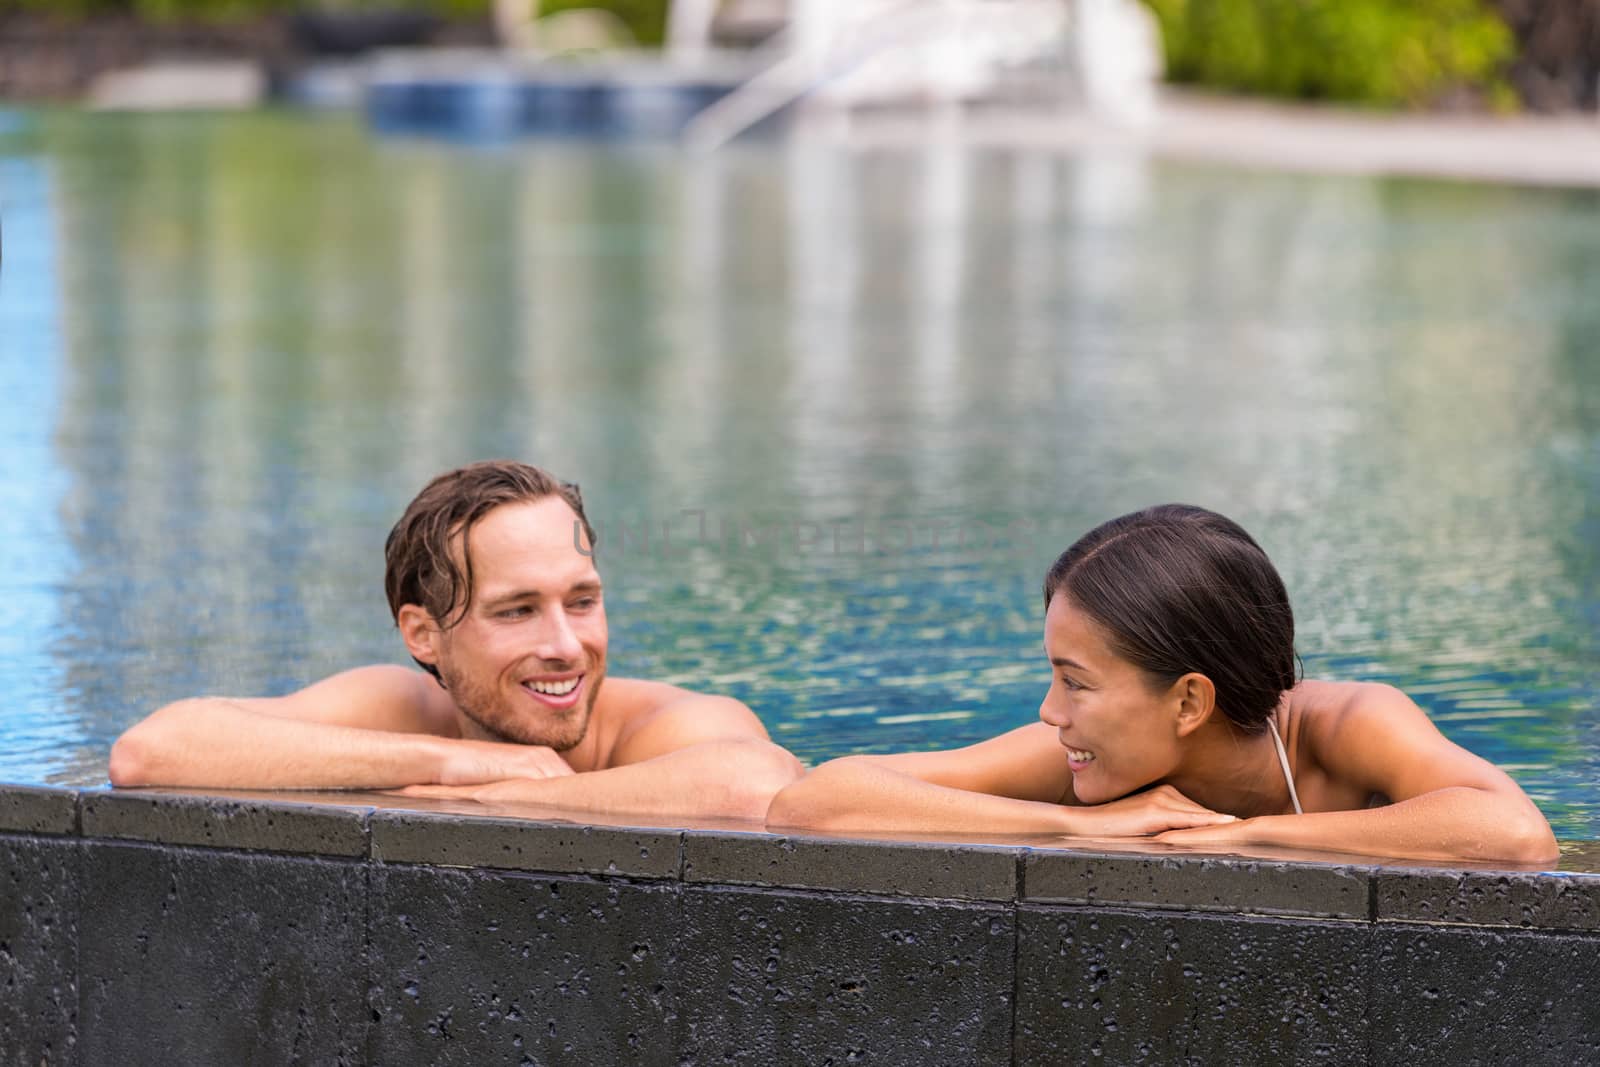 Wellness spa pool couple relaxing in hydrotherapy luxury travel resort on tropical holidays together enjoying the swim in water.